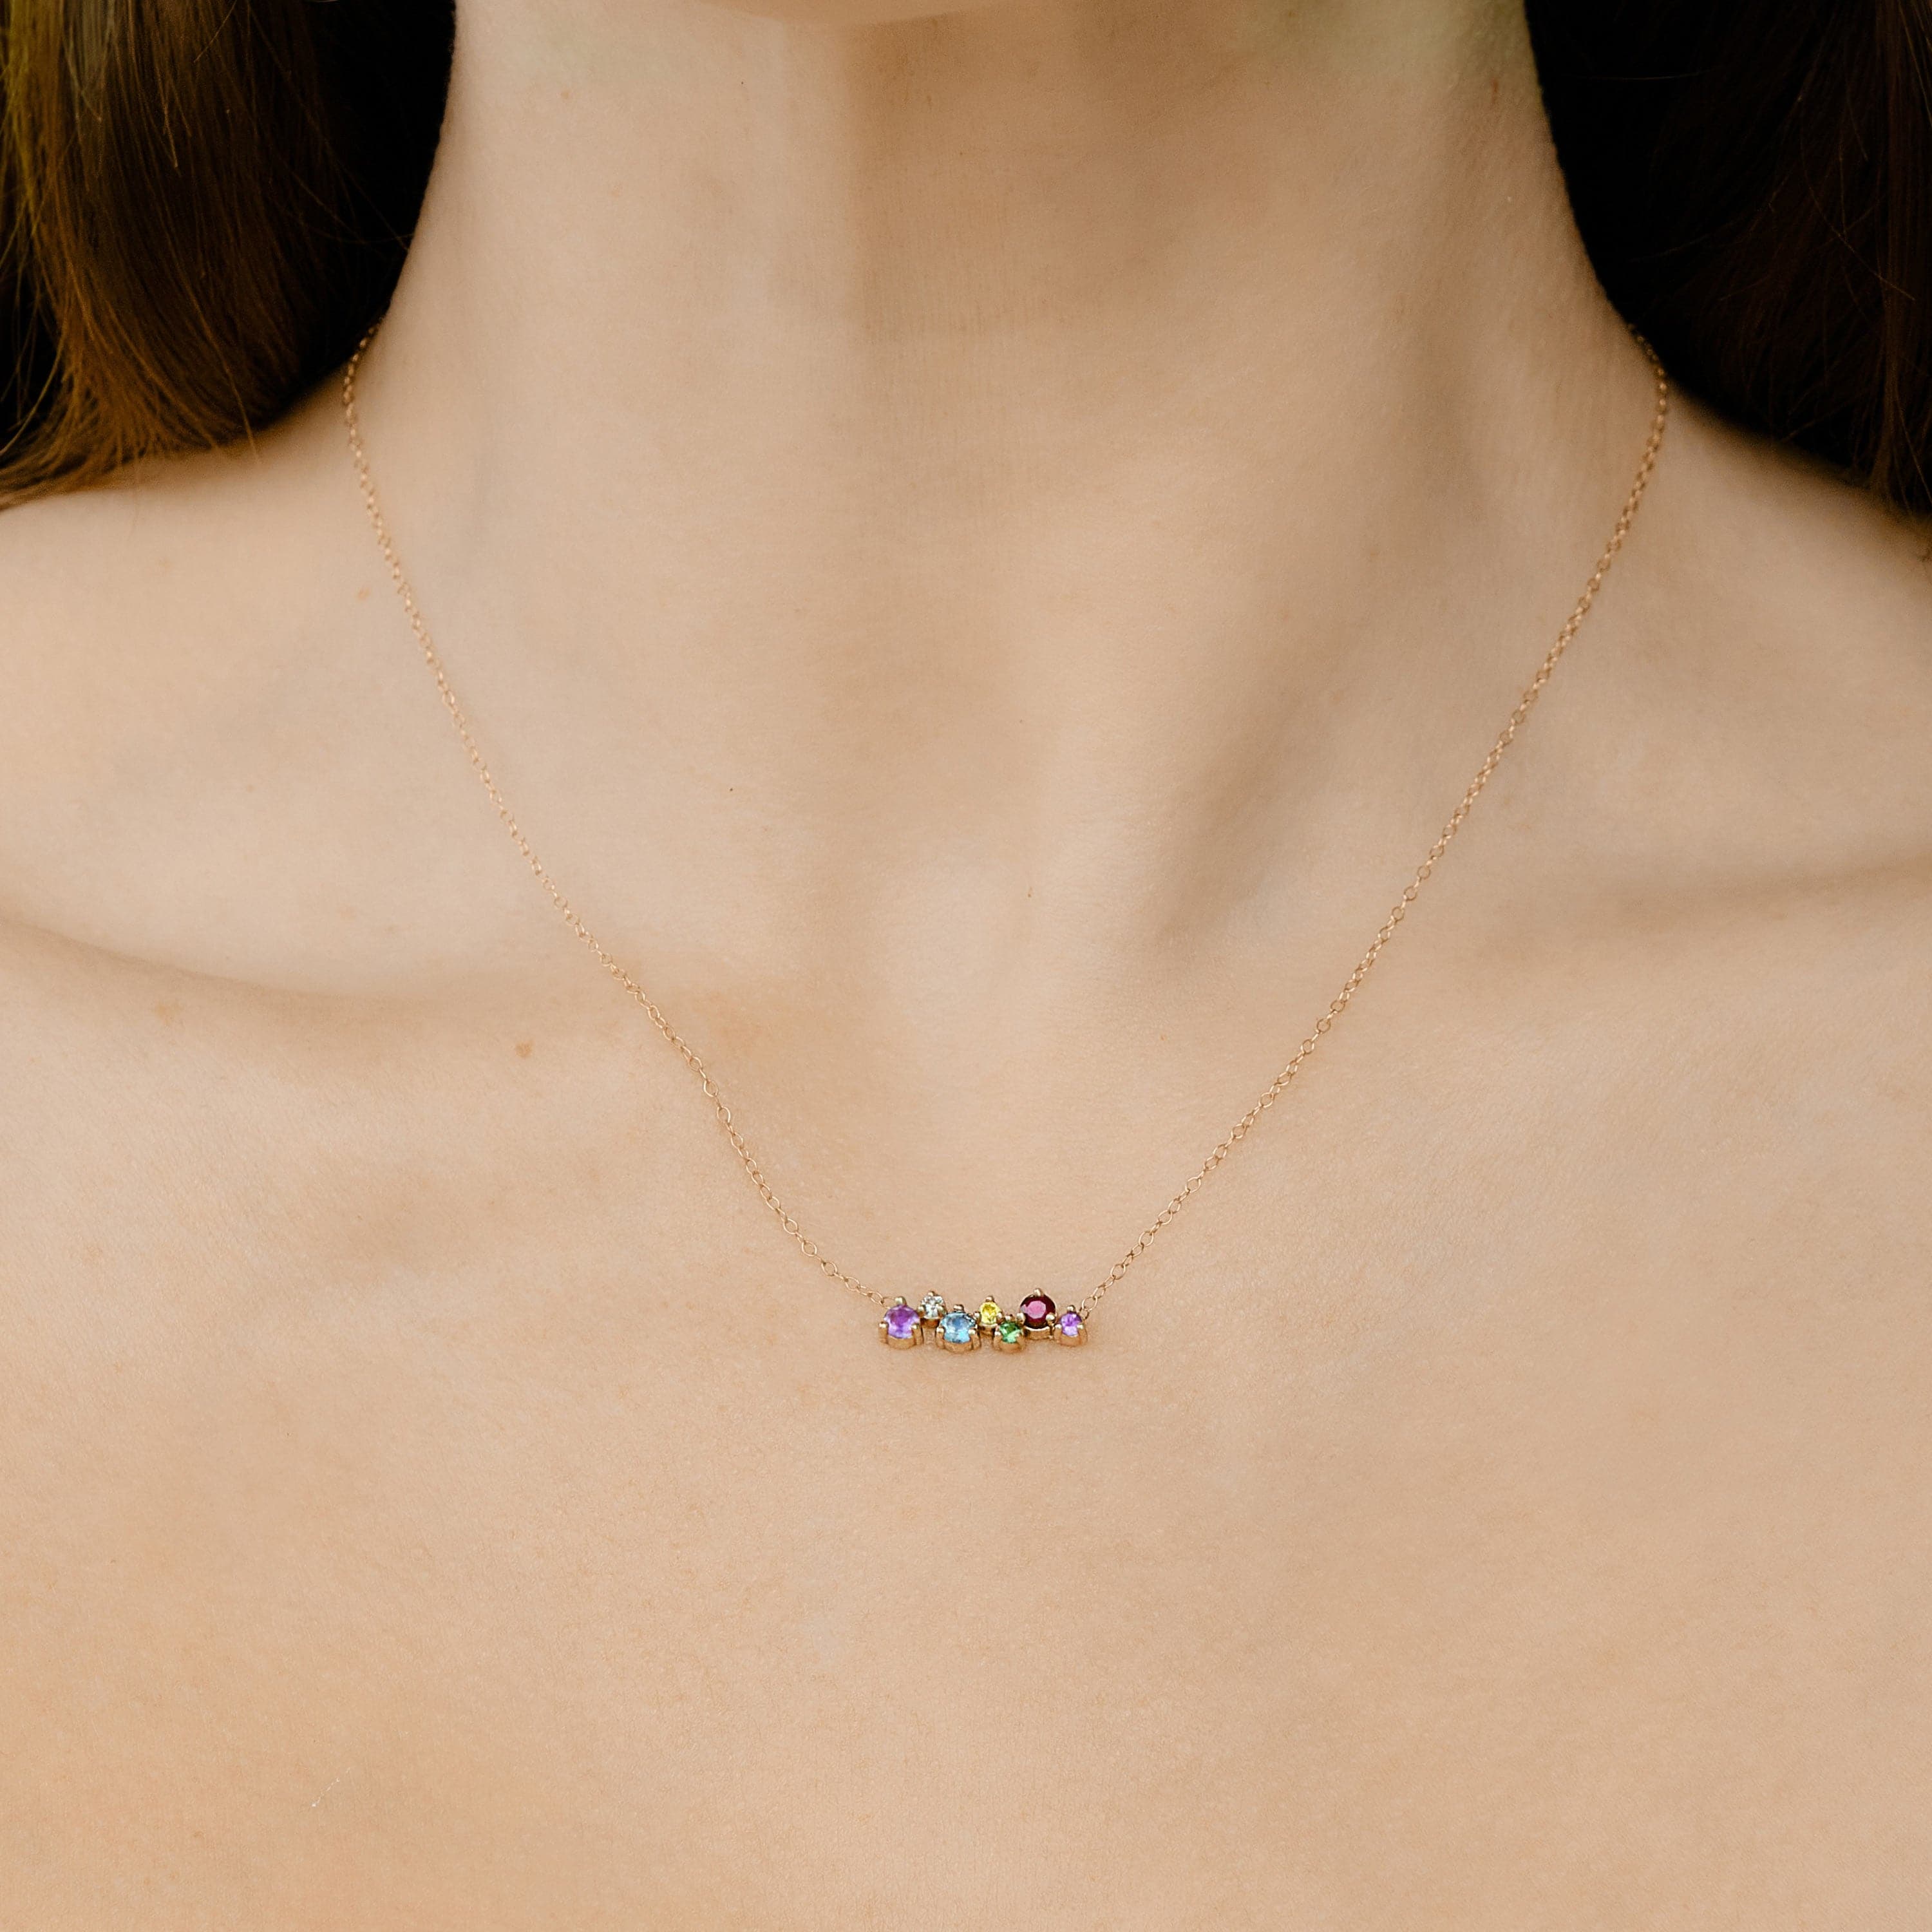 Ad Astra Rainbow Bubble Necklace 14k Solid Gold |  Necklaces - Common Era Jewelry